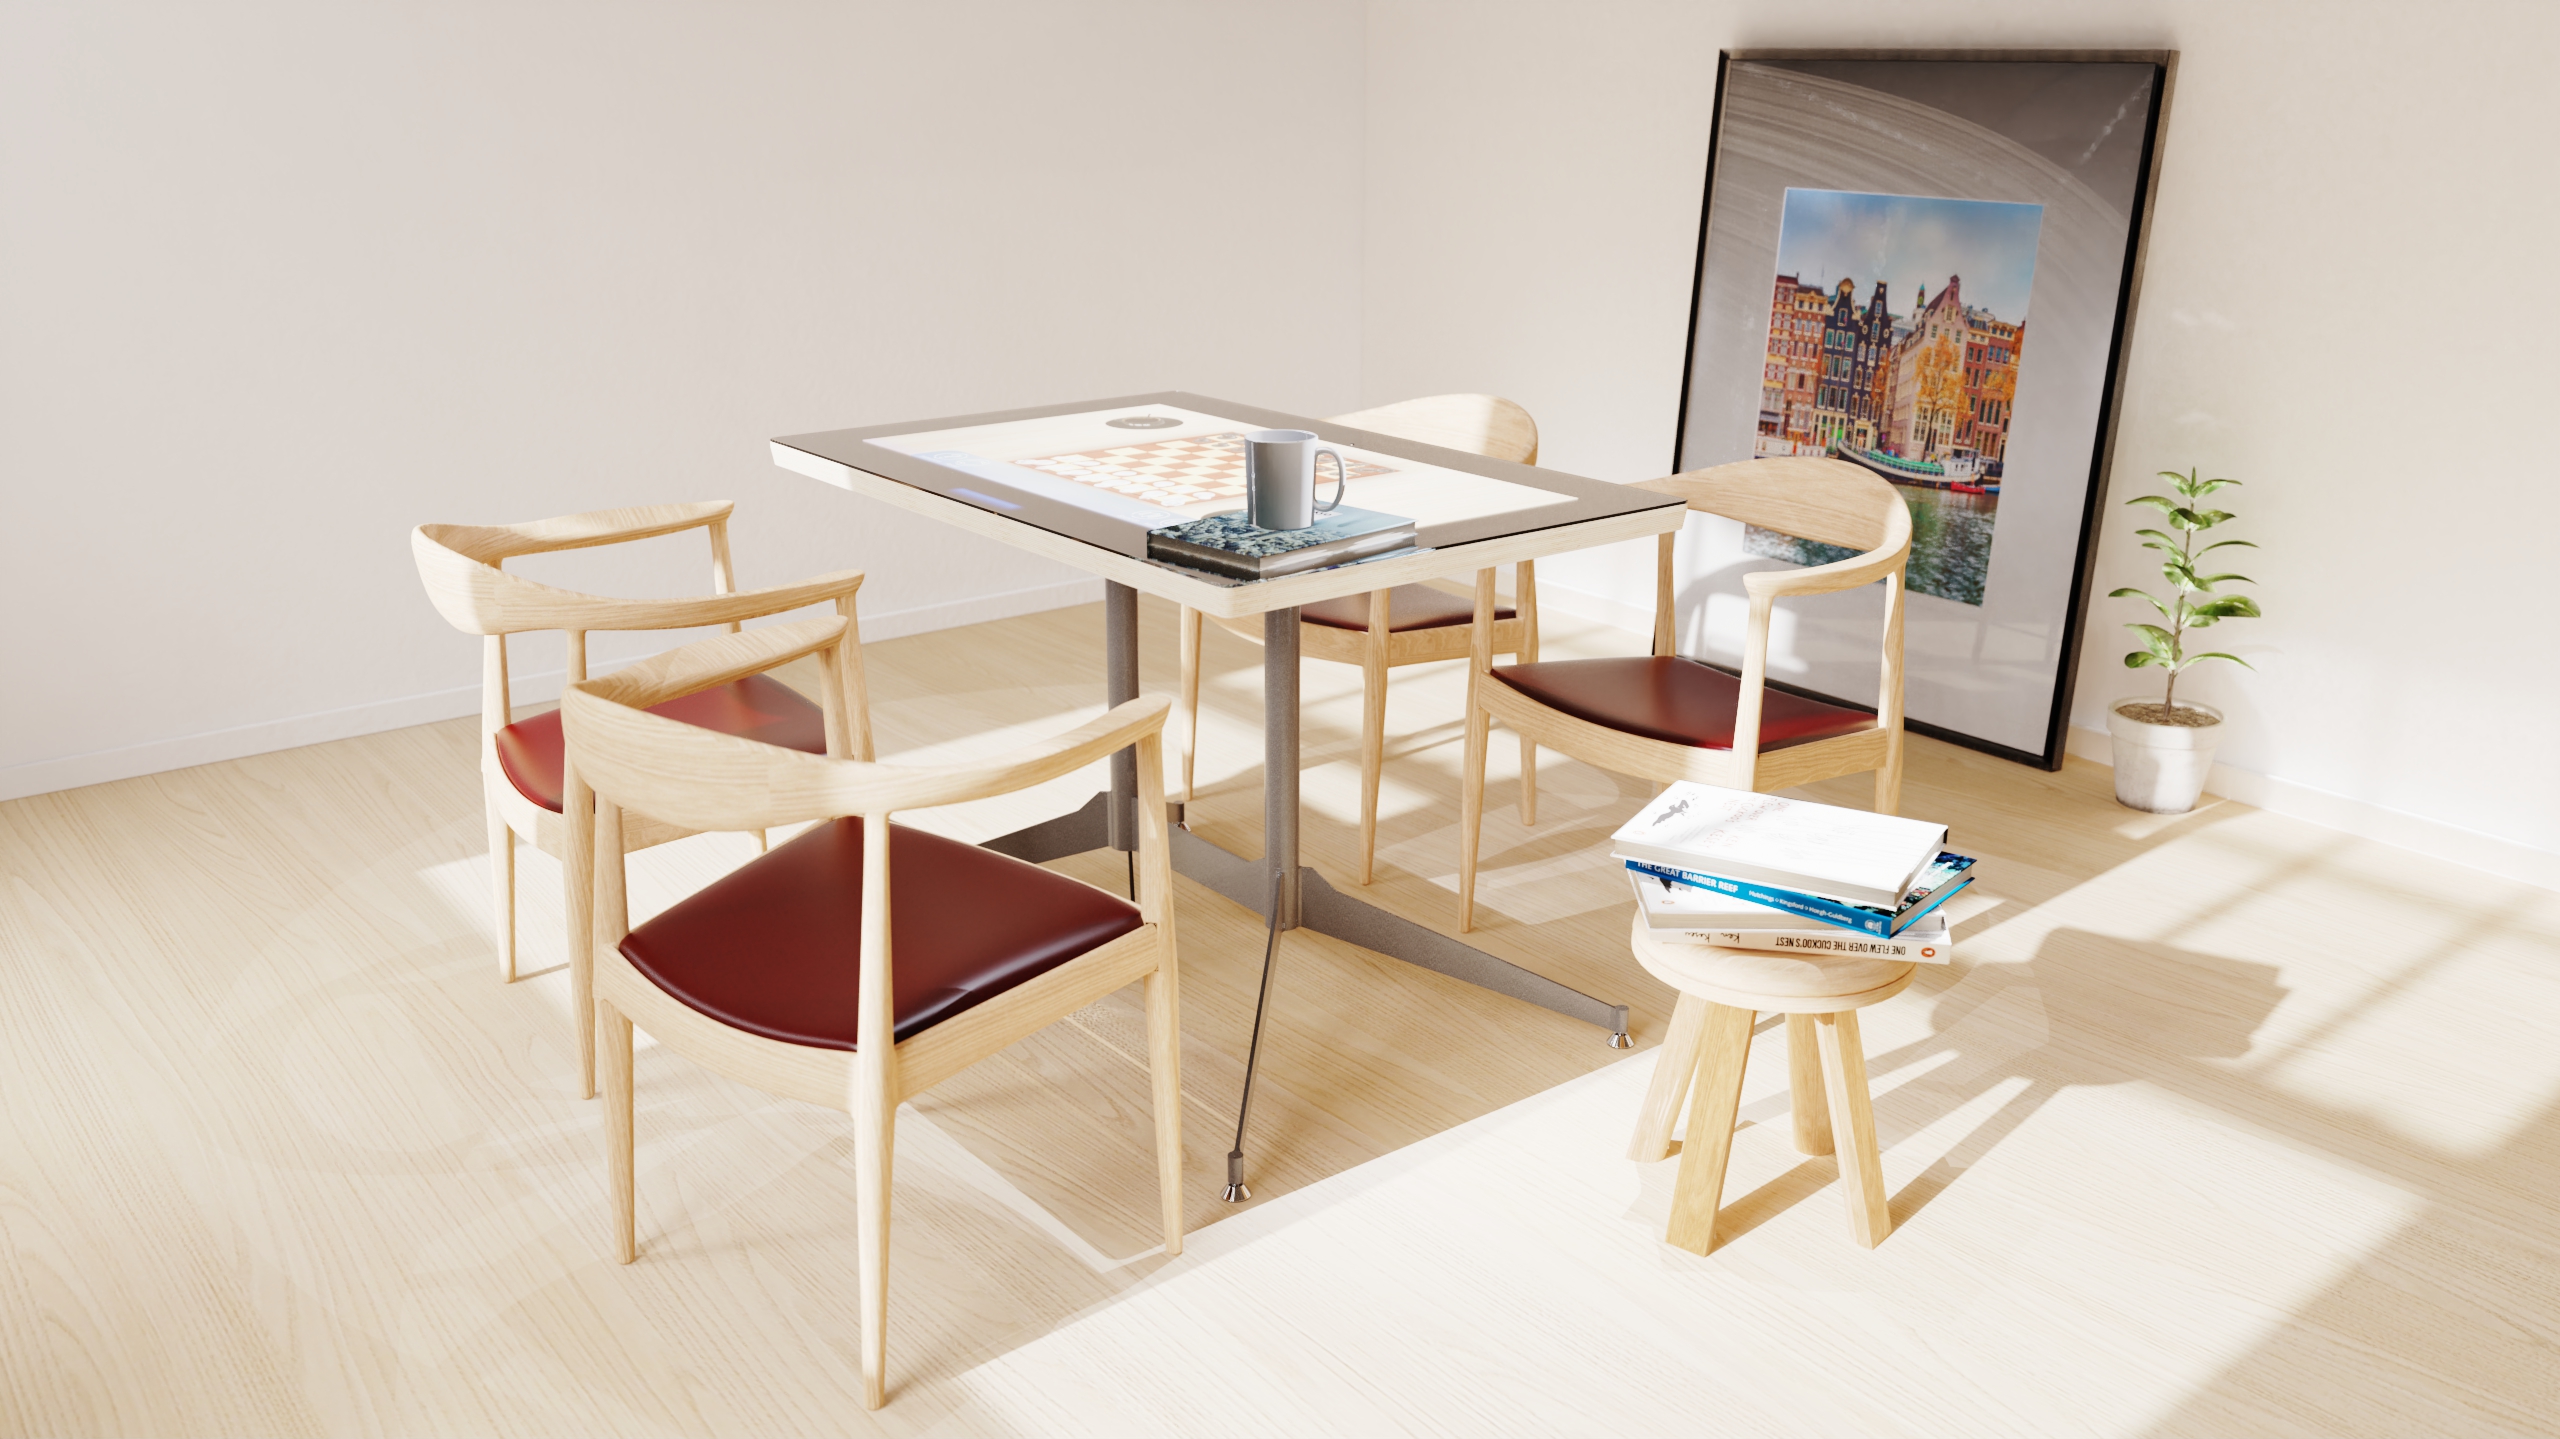 Brym Table Delux, for all your playing pleasure and social interaction for nursing homes